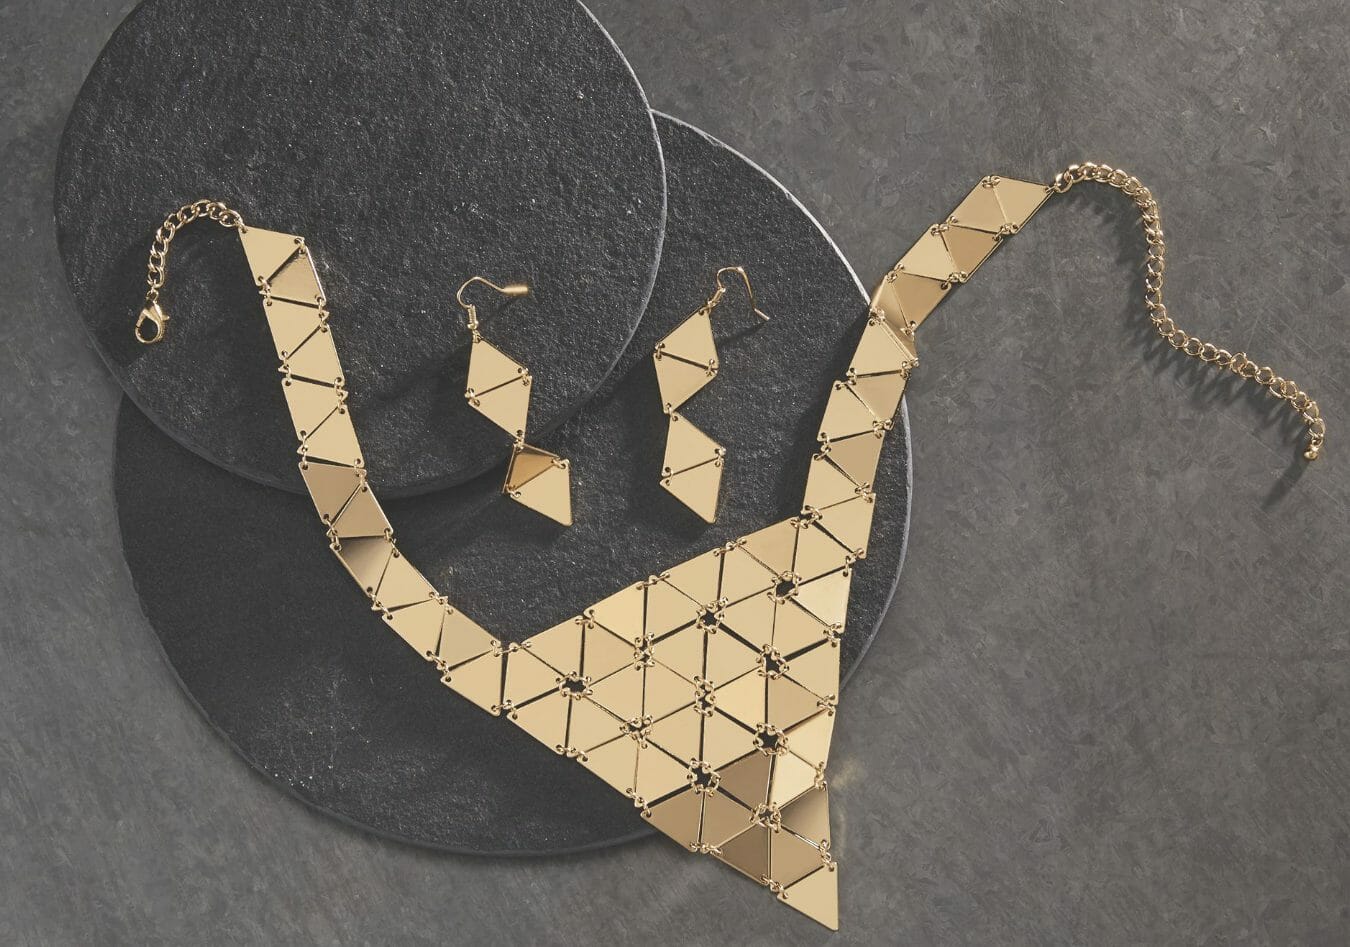 Triangles link together to create a bold geometric statement. Necklace is 18" long plus 3" extender. Earrings are 2 1/2" long. Available in goldtone, silvertone and gunmetal.